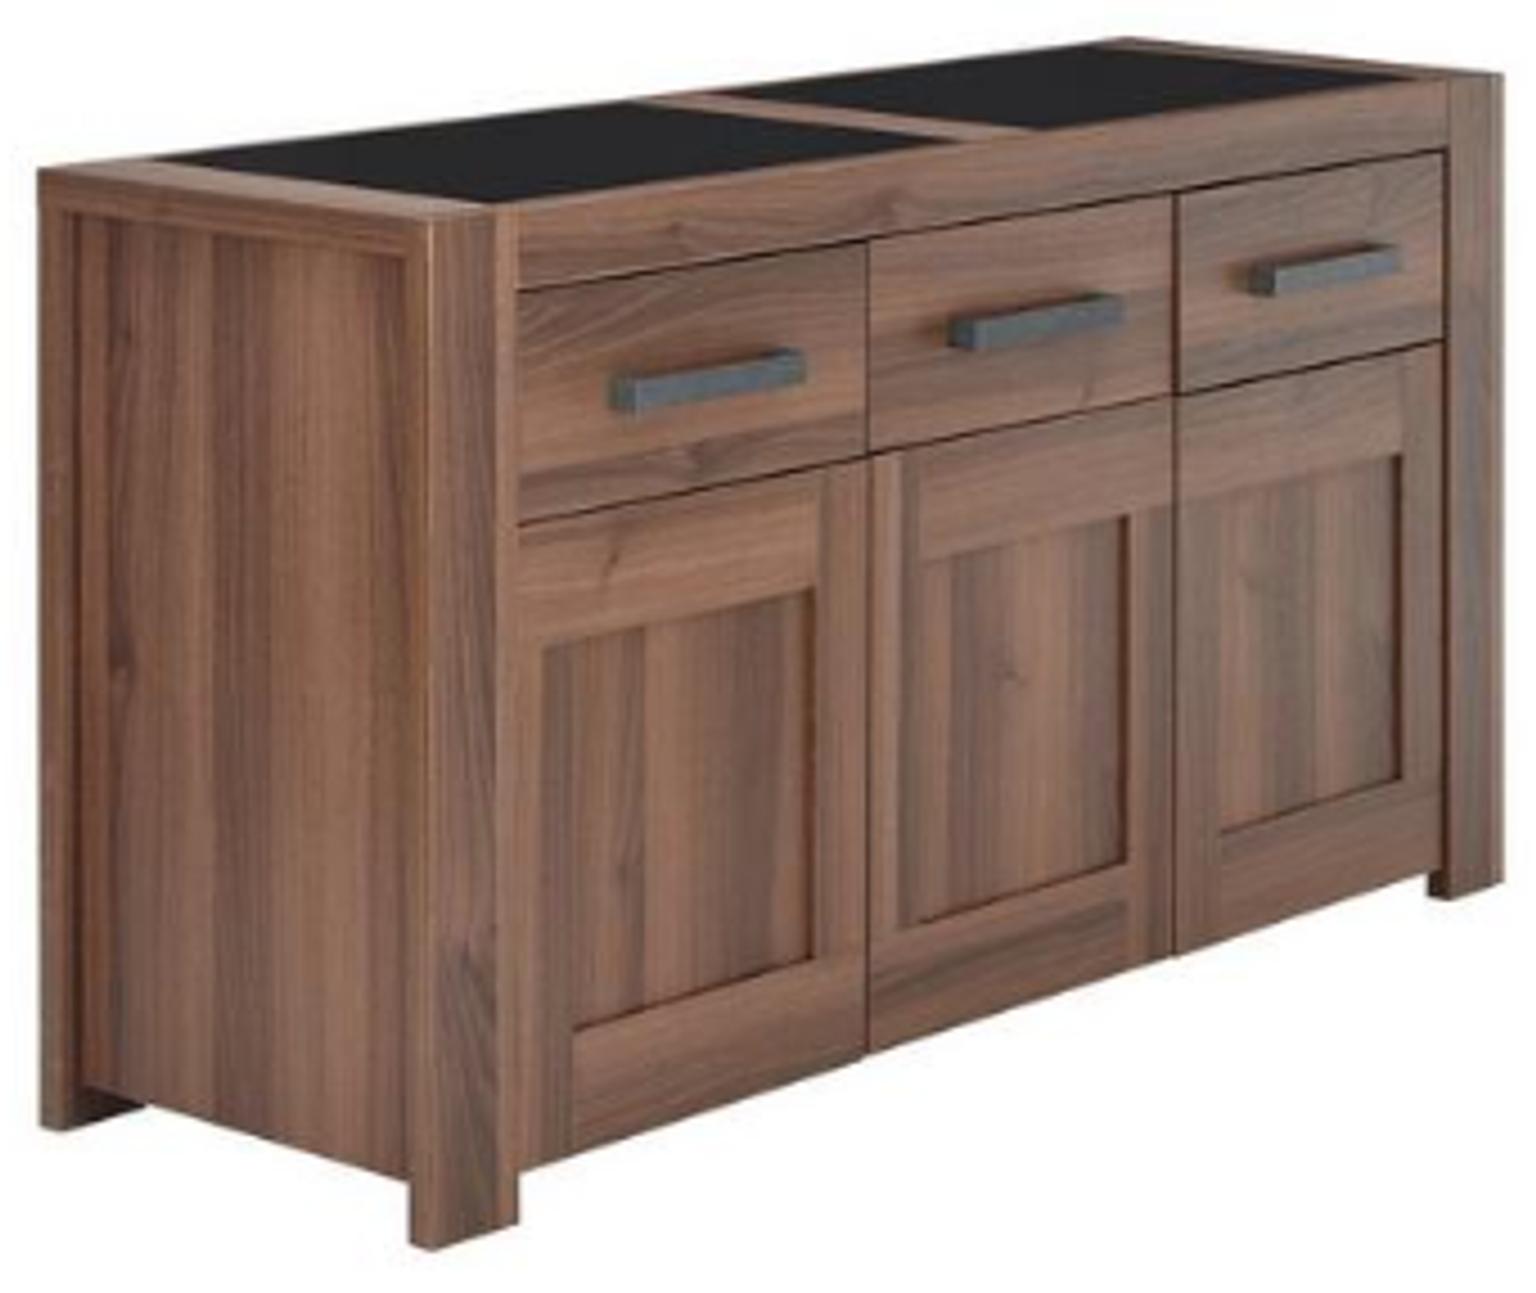 Avery 3 Door 3 Drawer Sideboard Walnut Effe In M18 Manchester For 75 00 For Sale Shpock